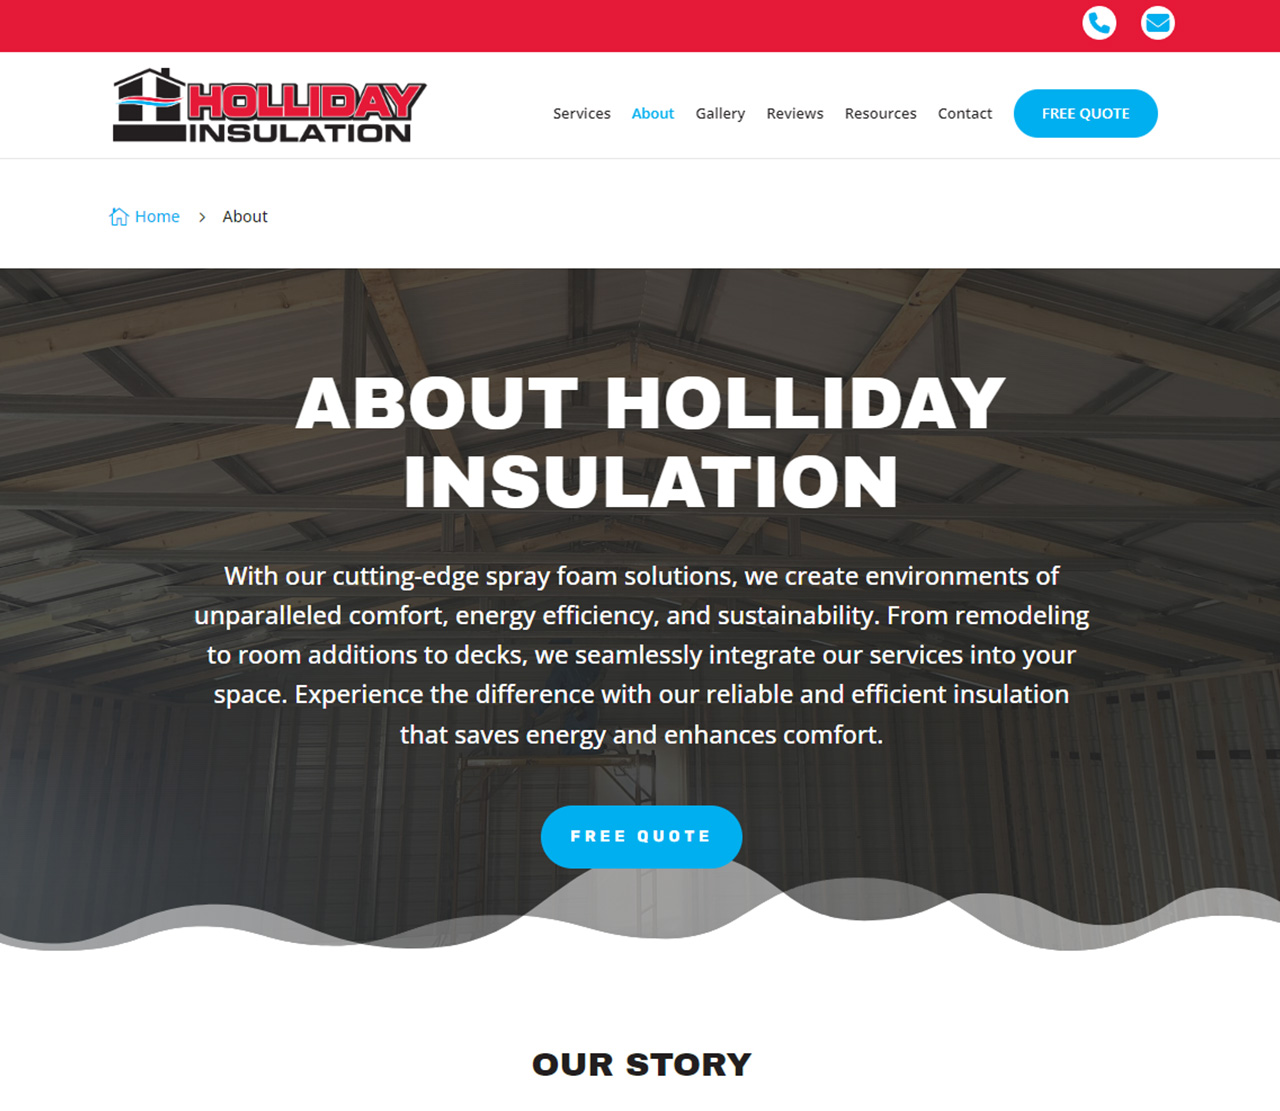 Holliday Insulation Website About Page